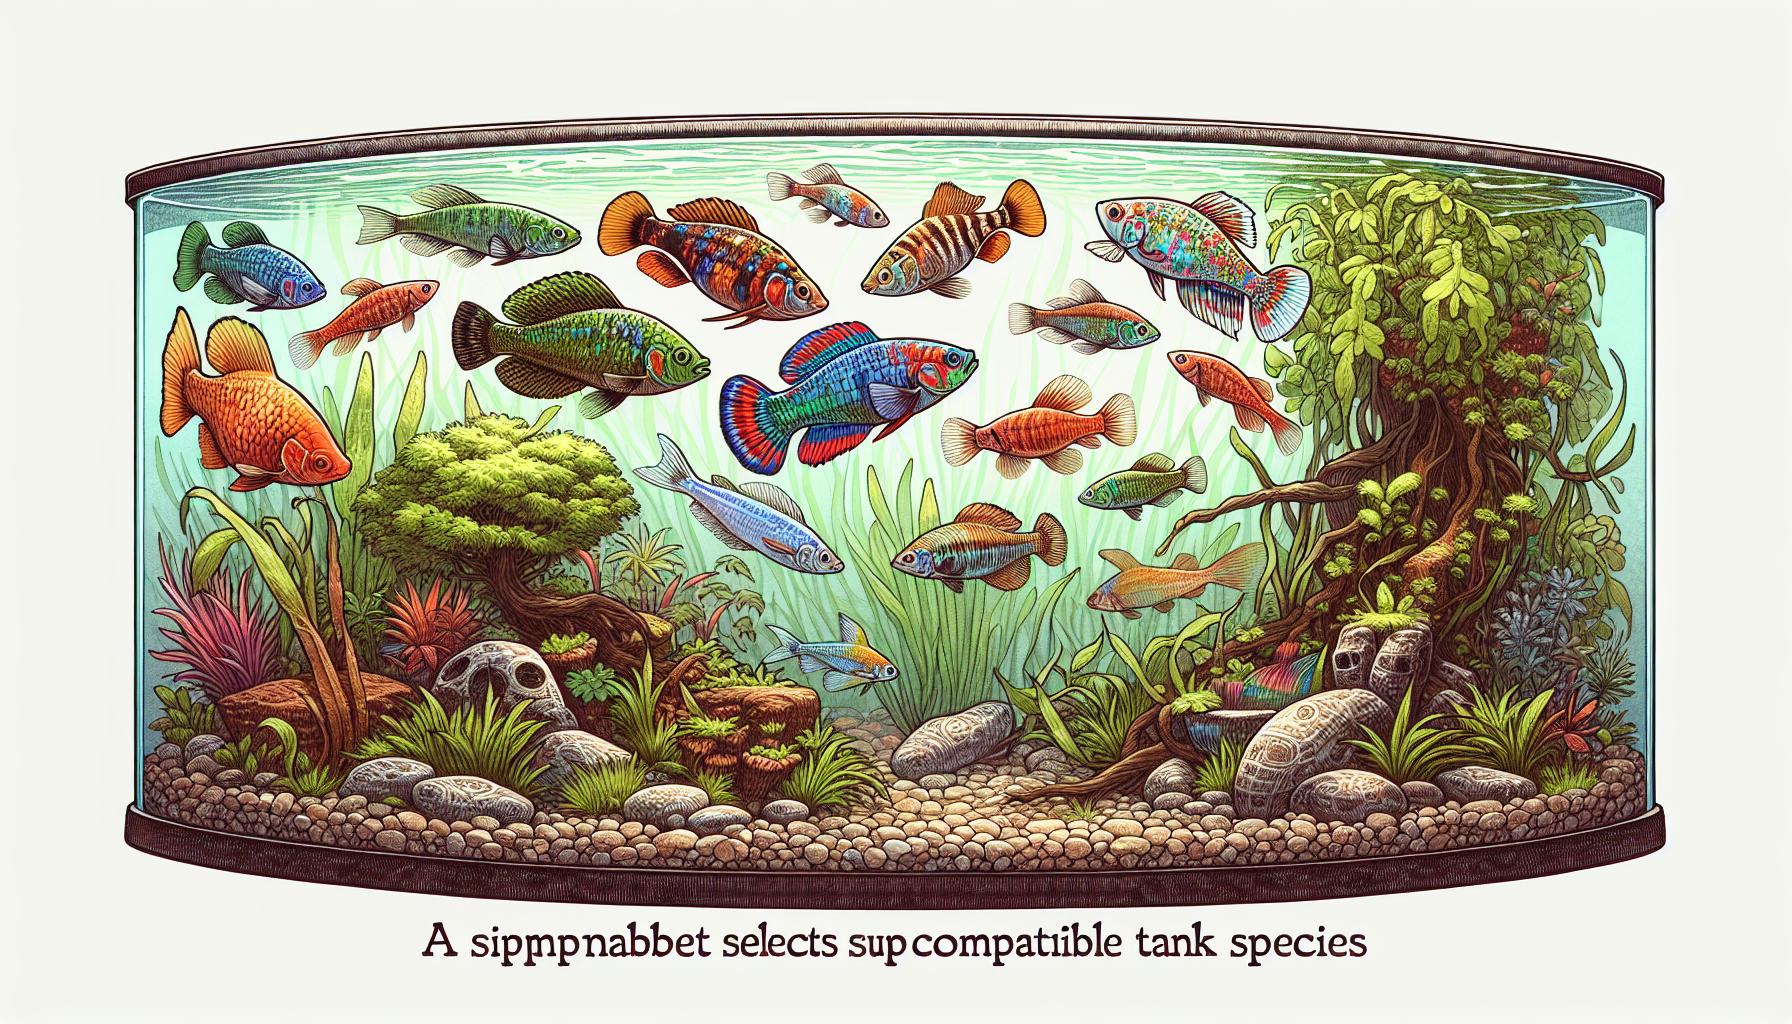 Illustration of guppies coexisting with peaceful fish species in a community tank